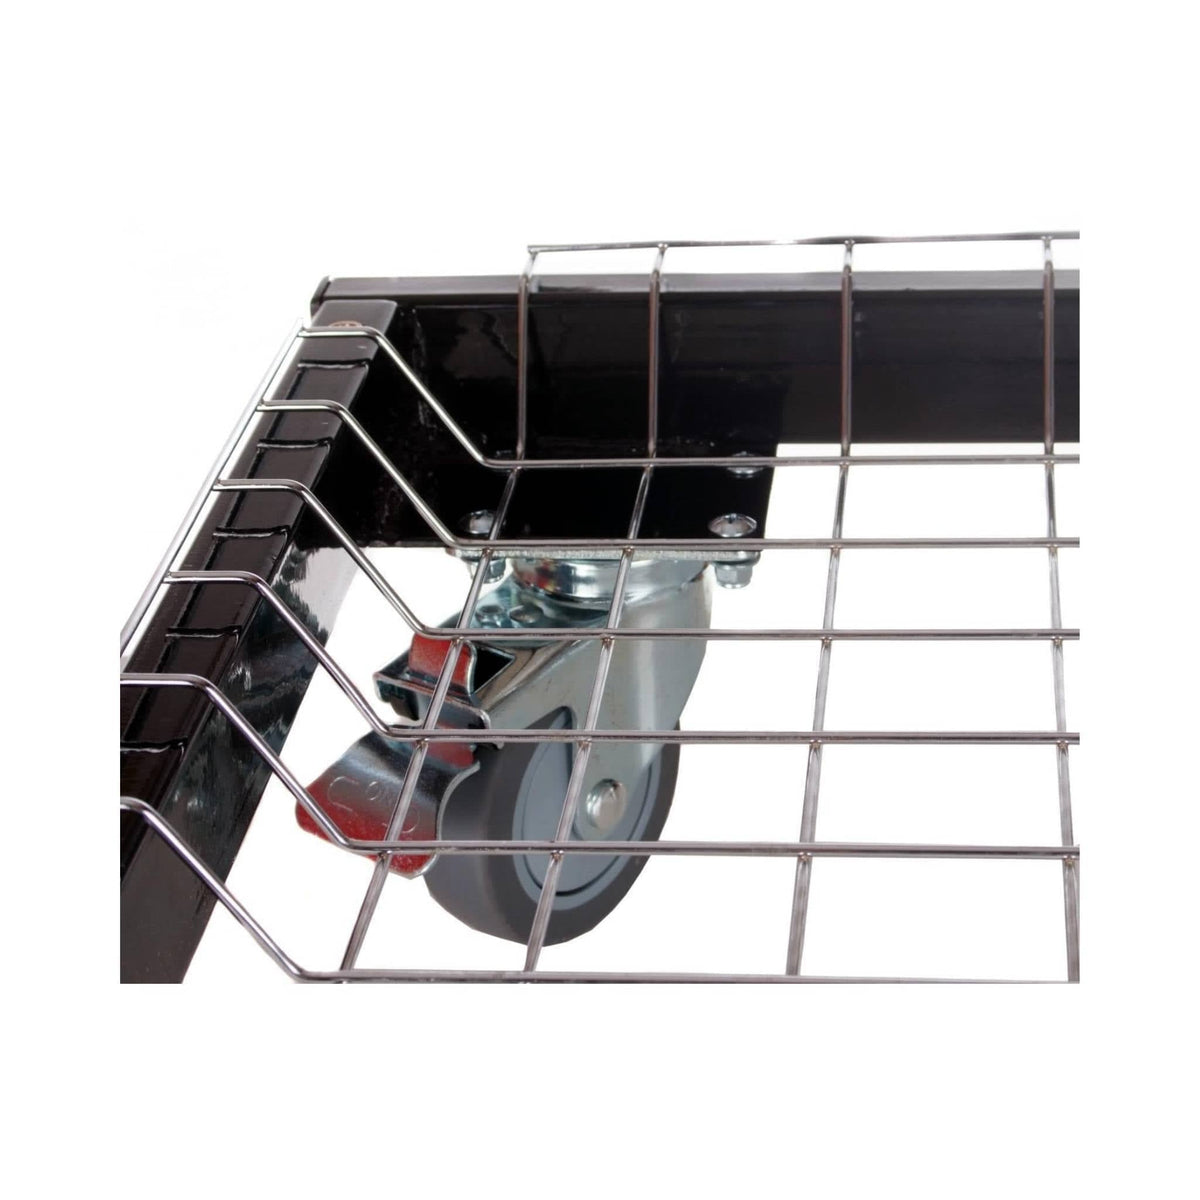 Primo Cart Base with Basket and Stainless Side Shelves